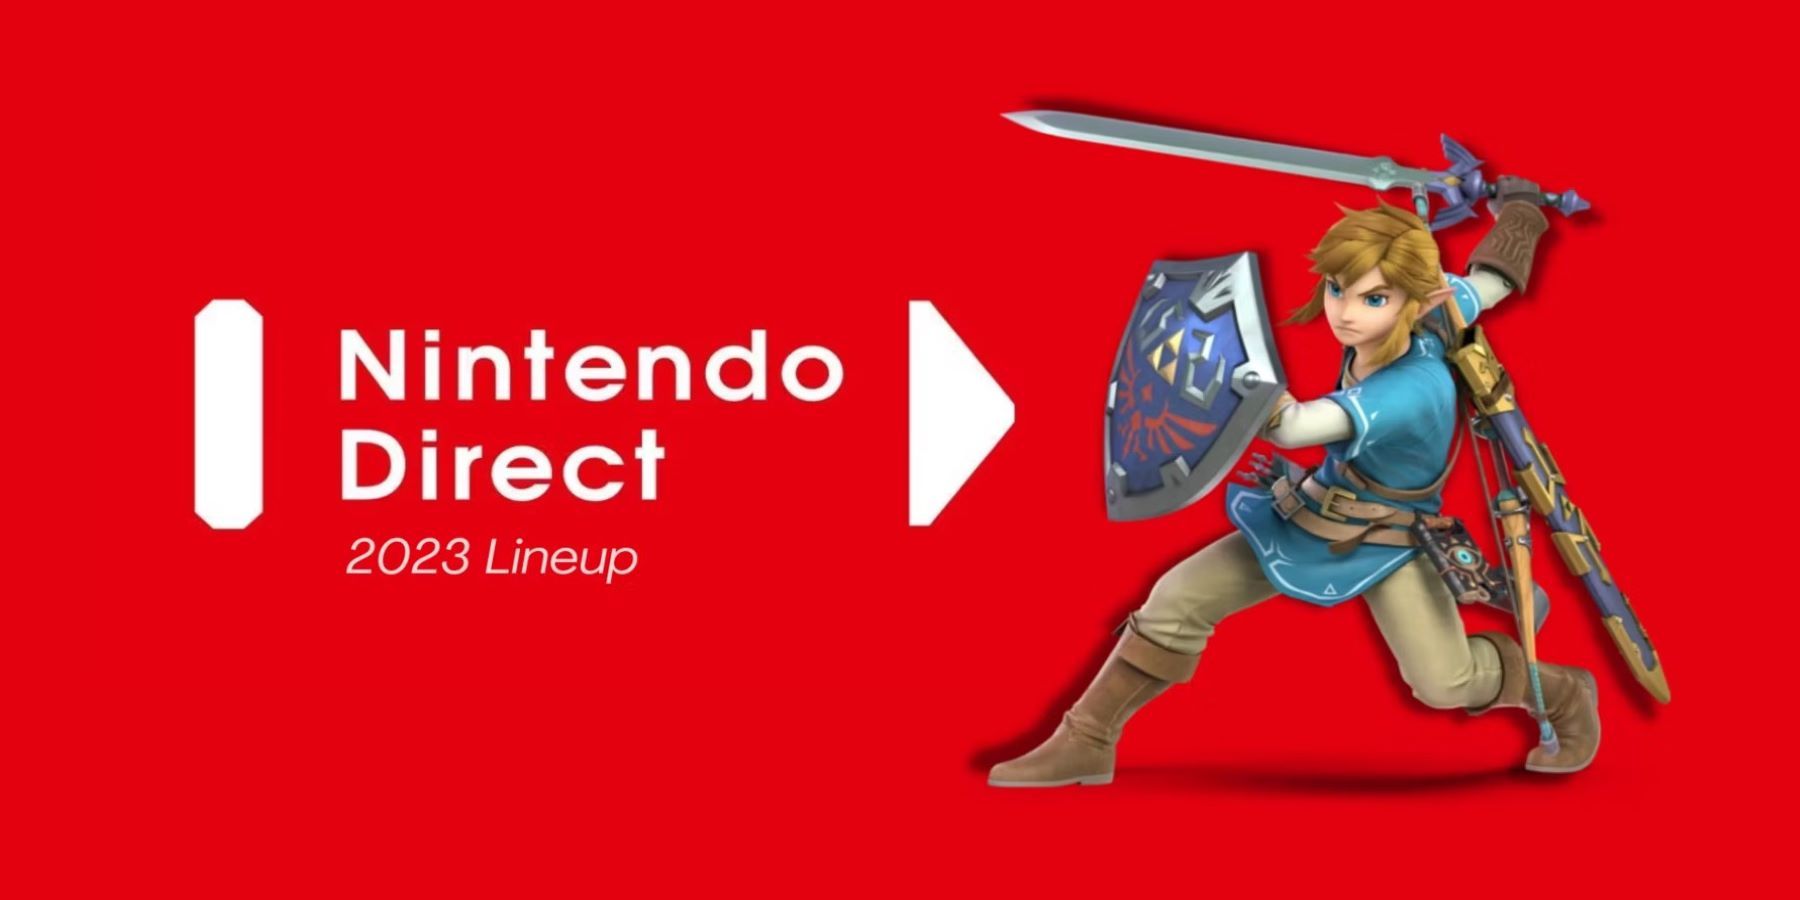 Link with the Nintendo Direct logo